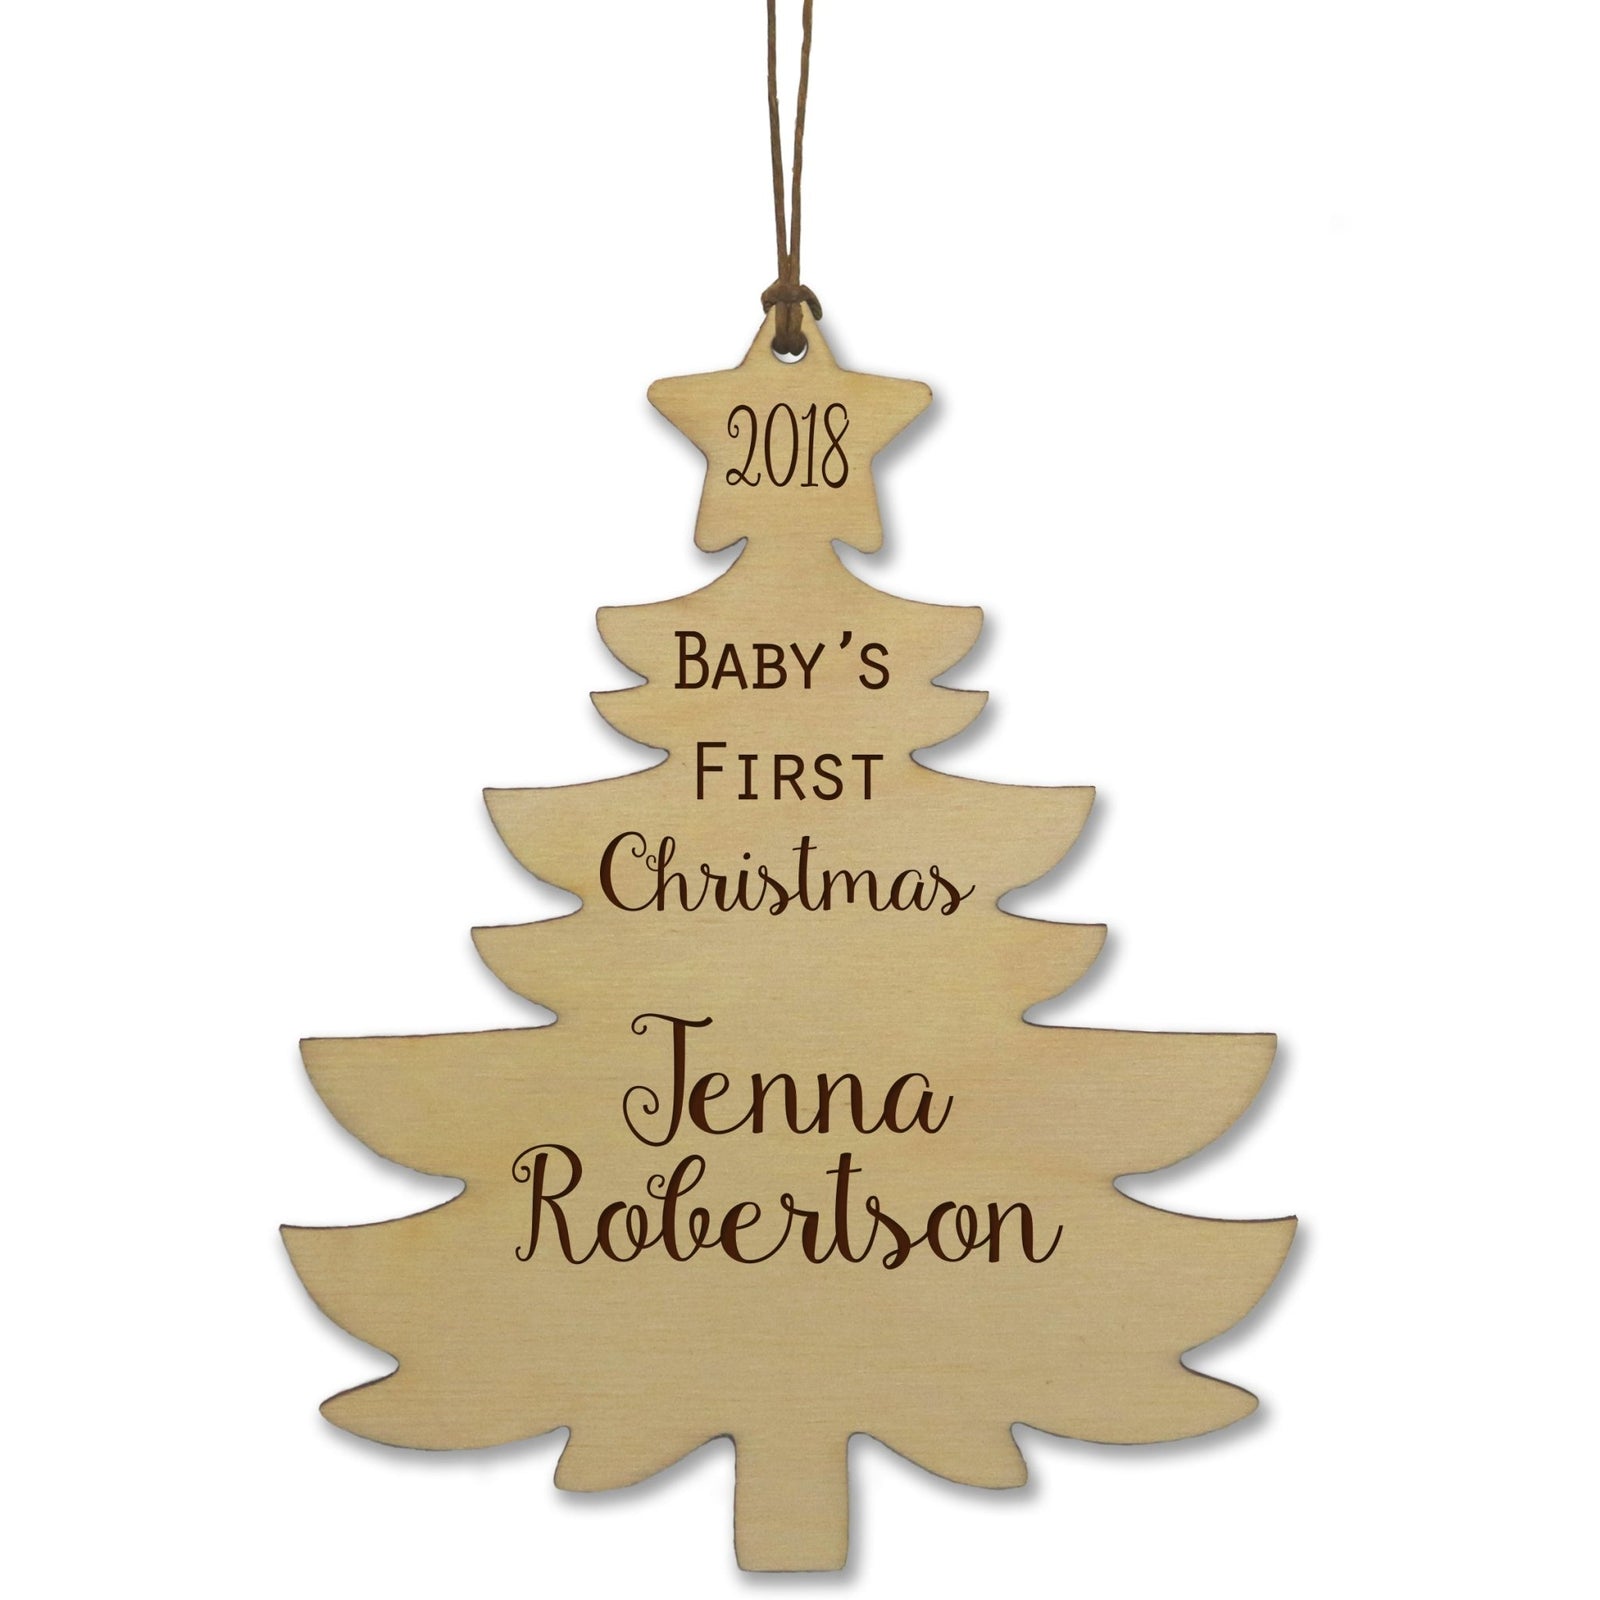 Personalized Christmas Tree Ornament - Baby's First Christmas - LifeSong Milestones